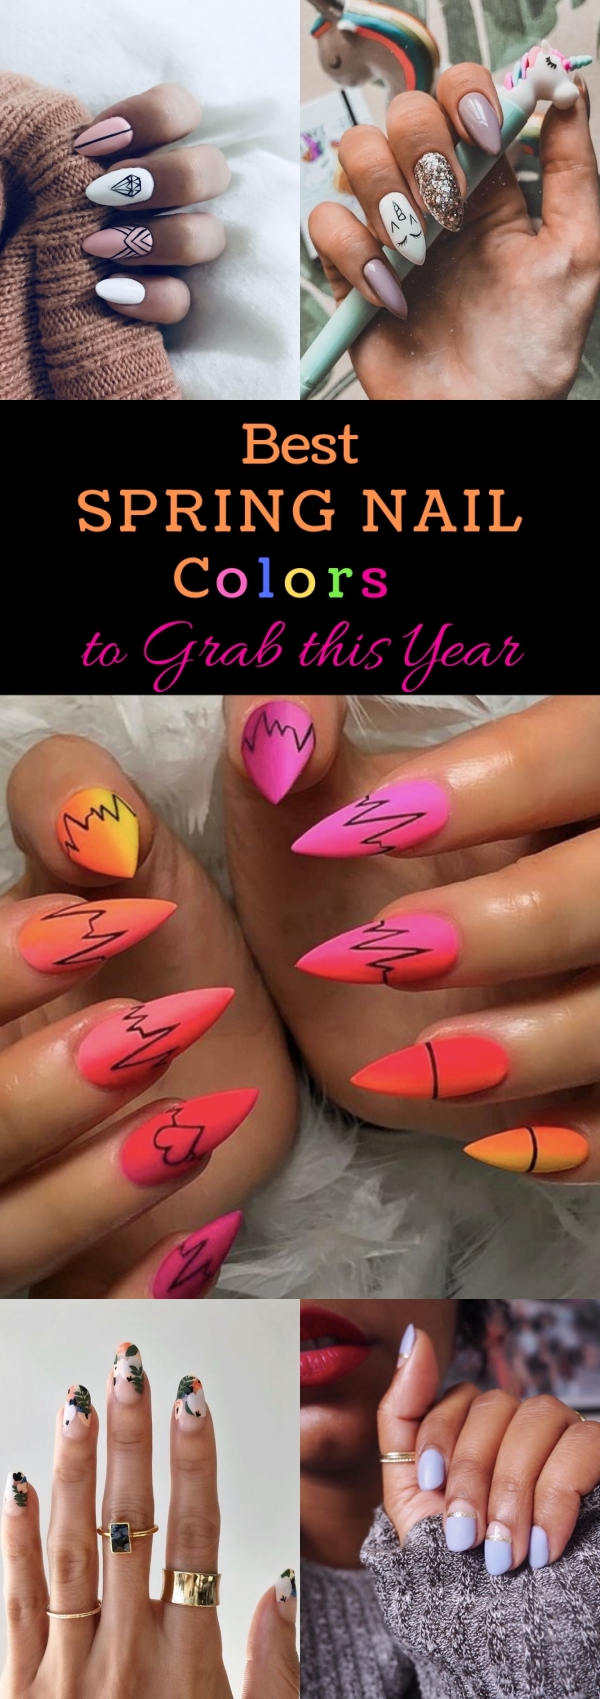 Best-Spring-Nail-Colors-to-Grab-this-Year